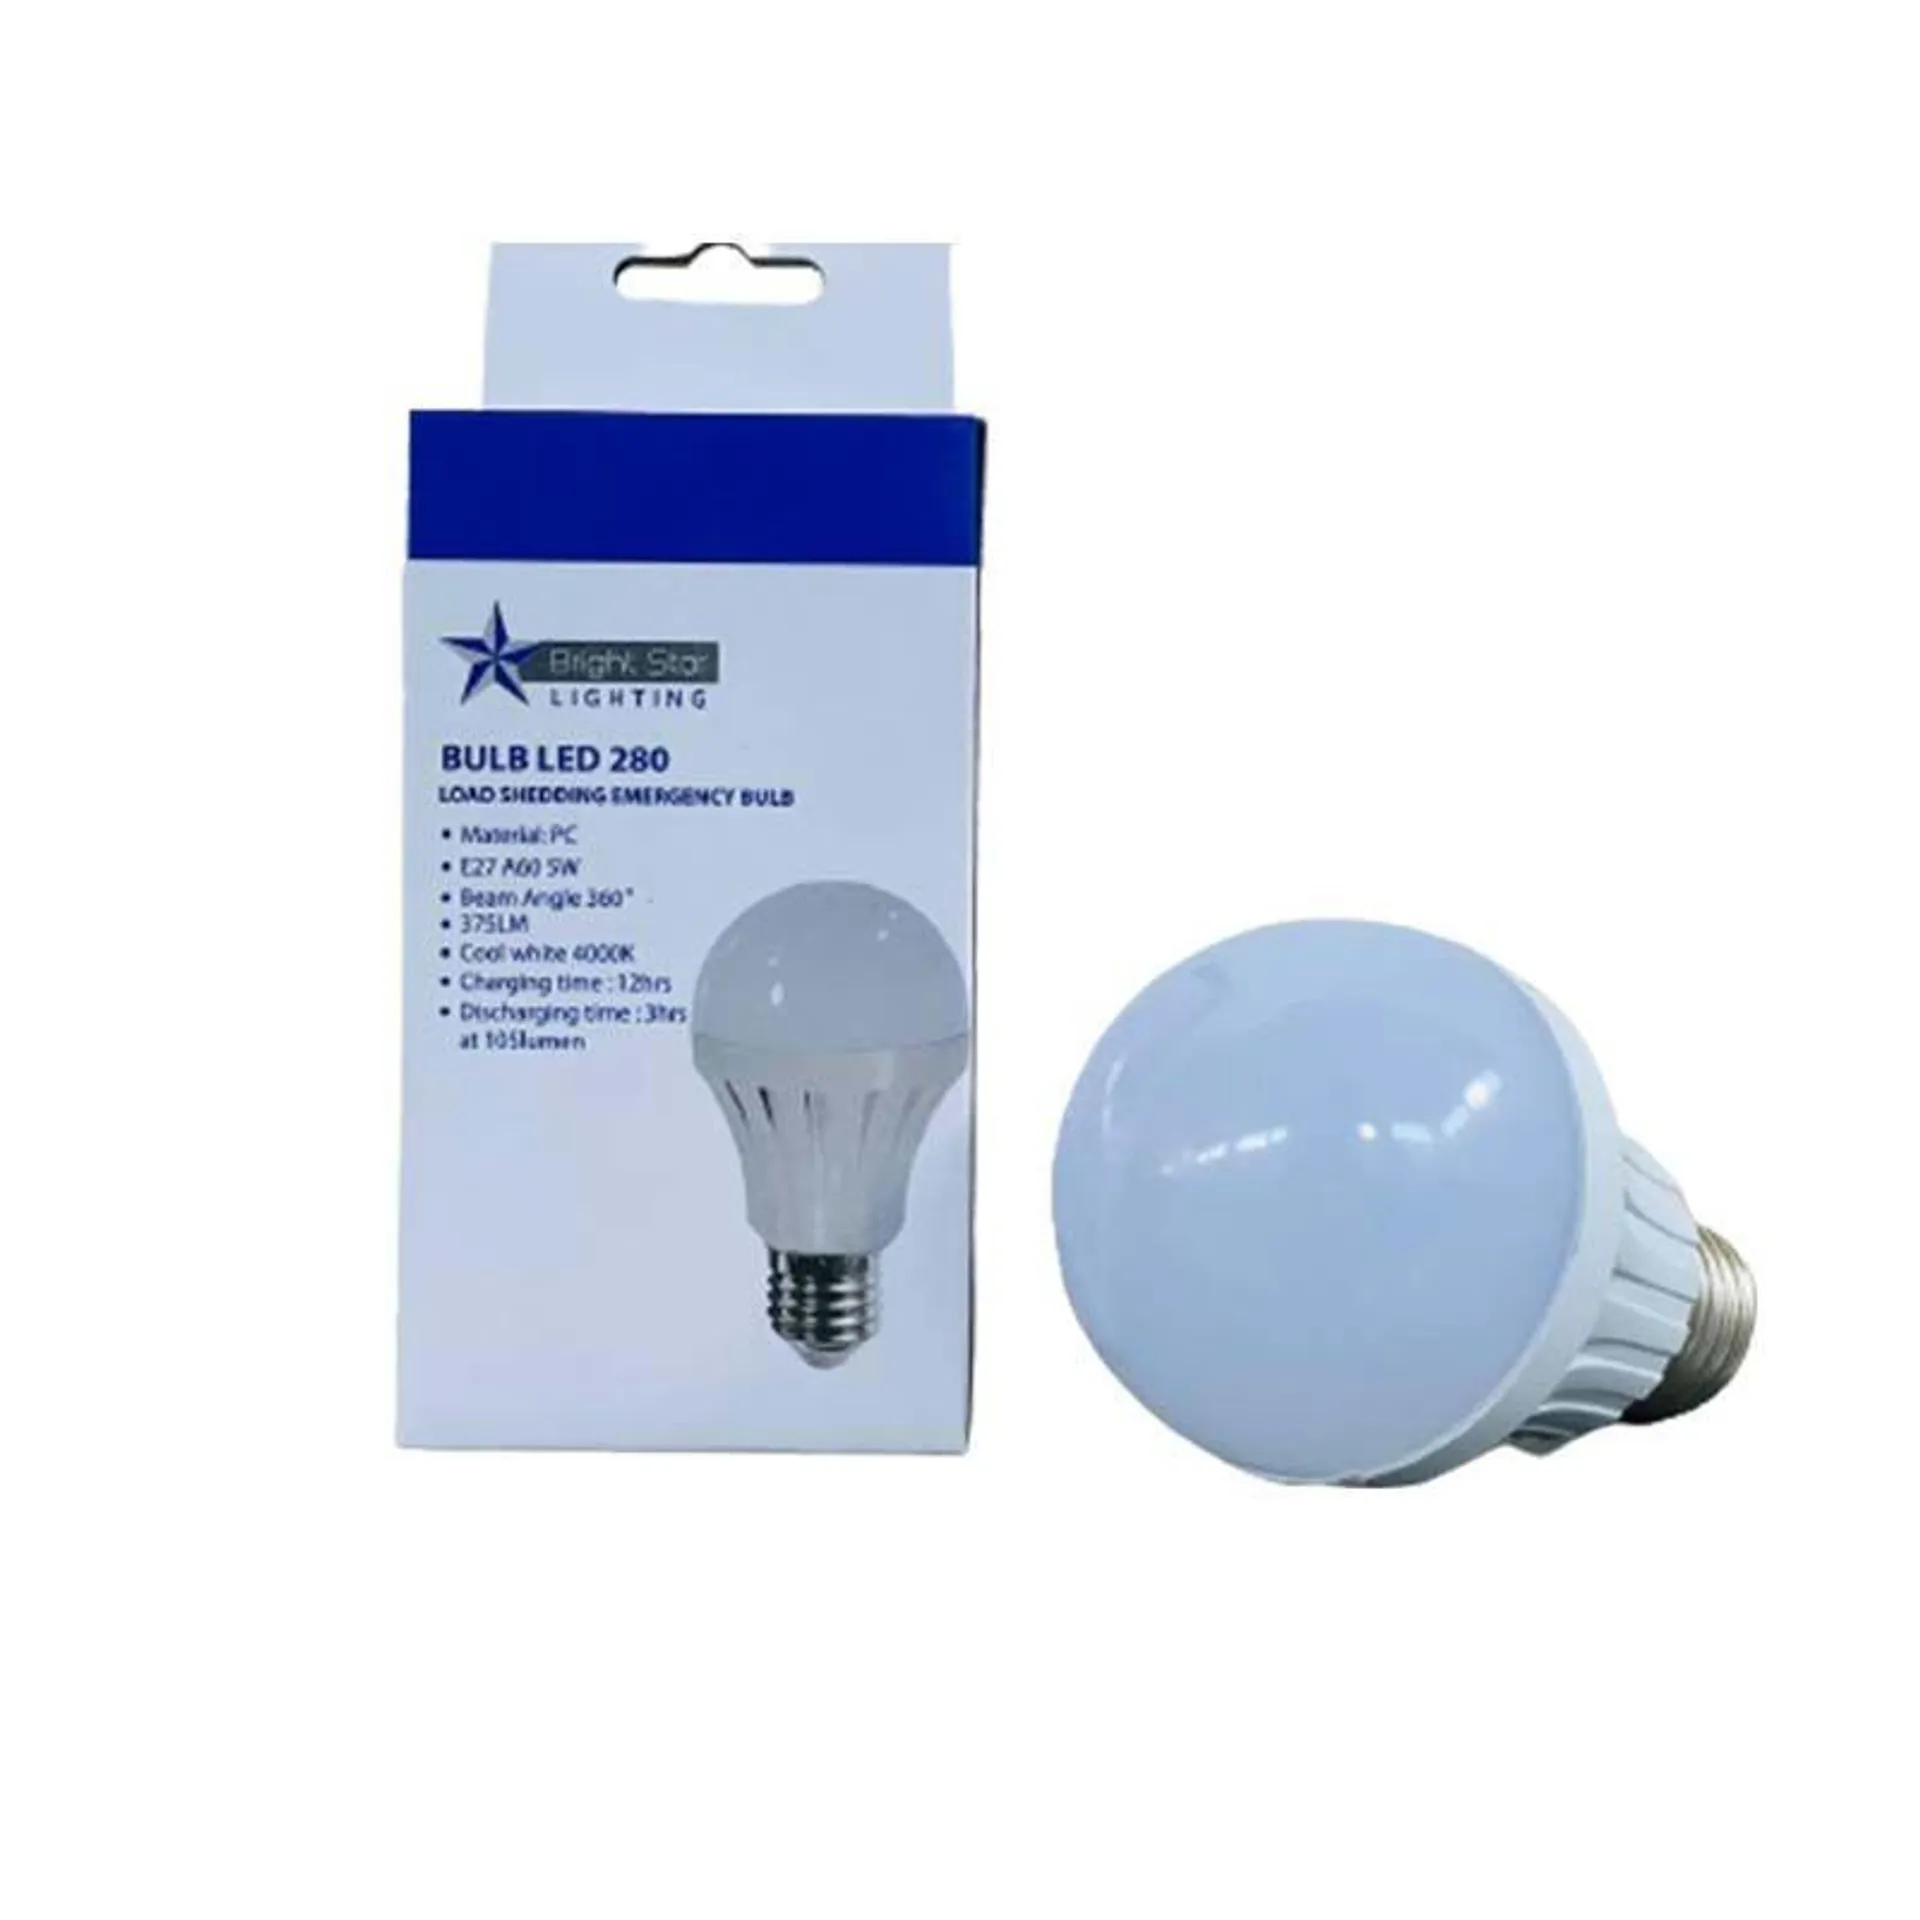 A60 Emergency Rechargeable Bulb